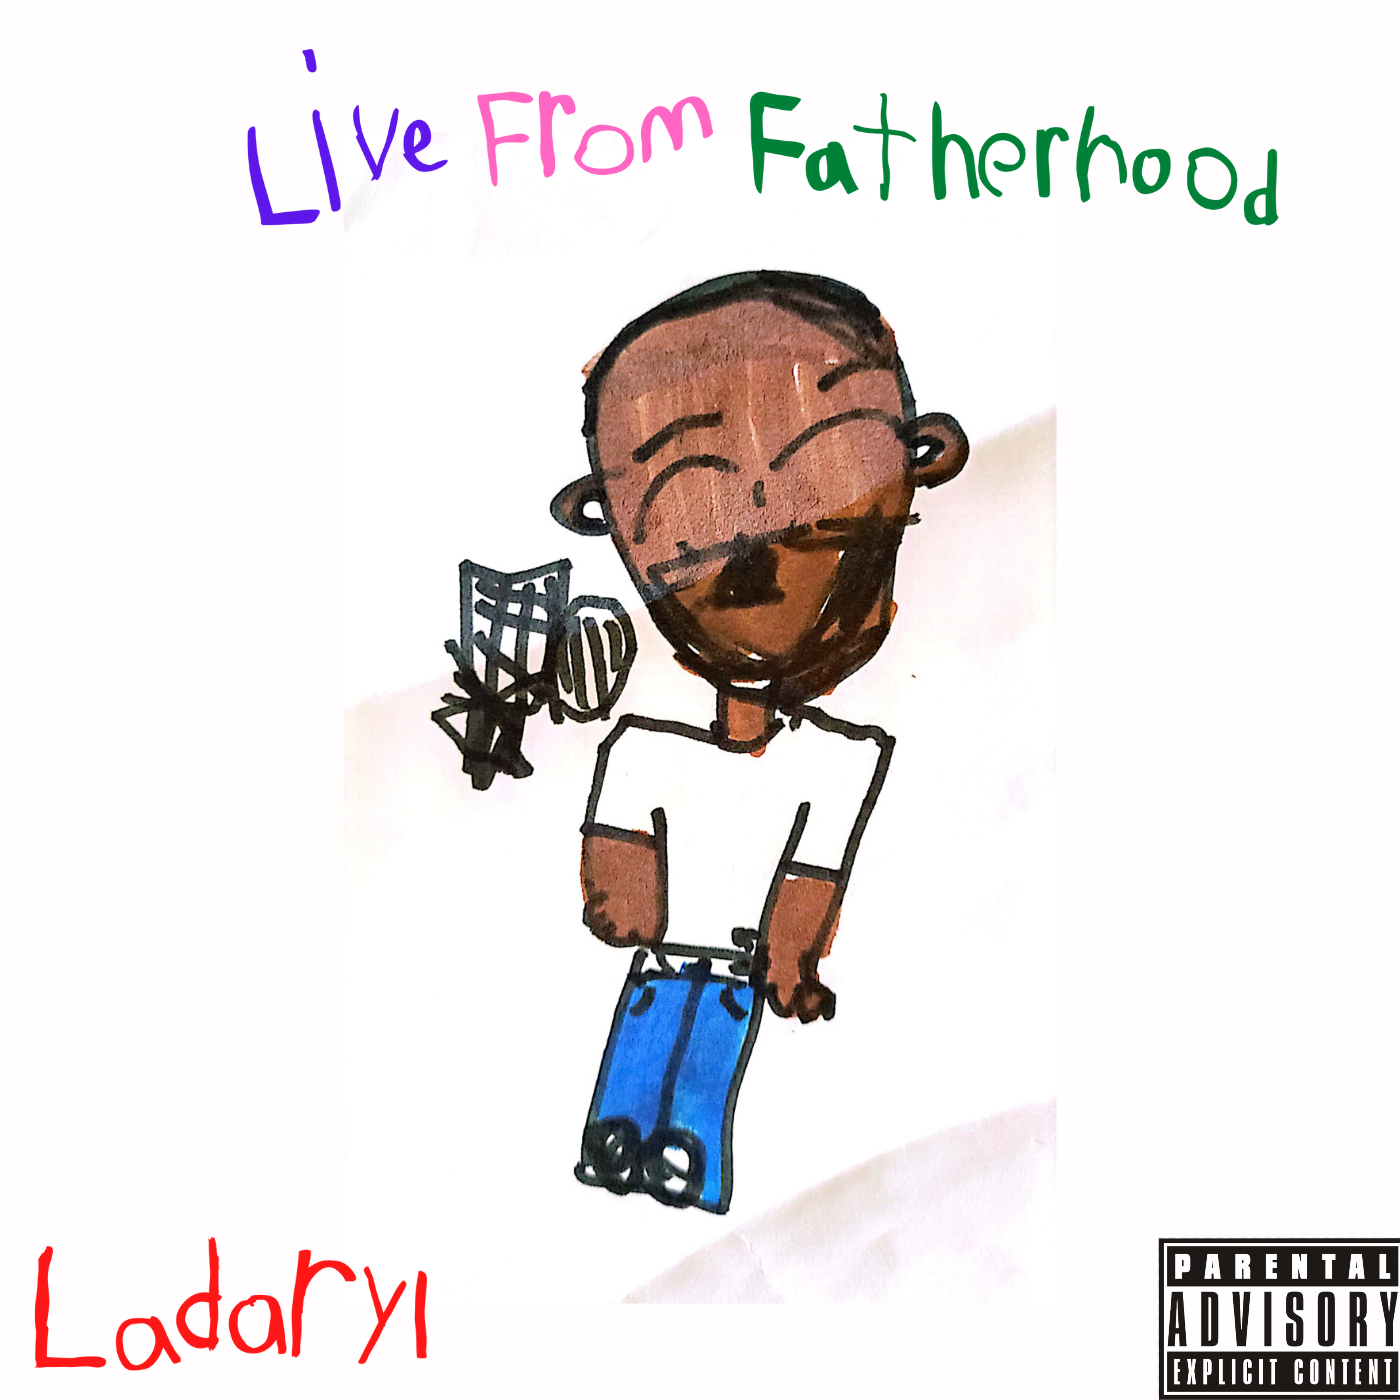 Live From Fatherhood album cover art.